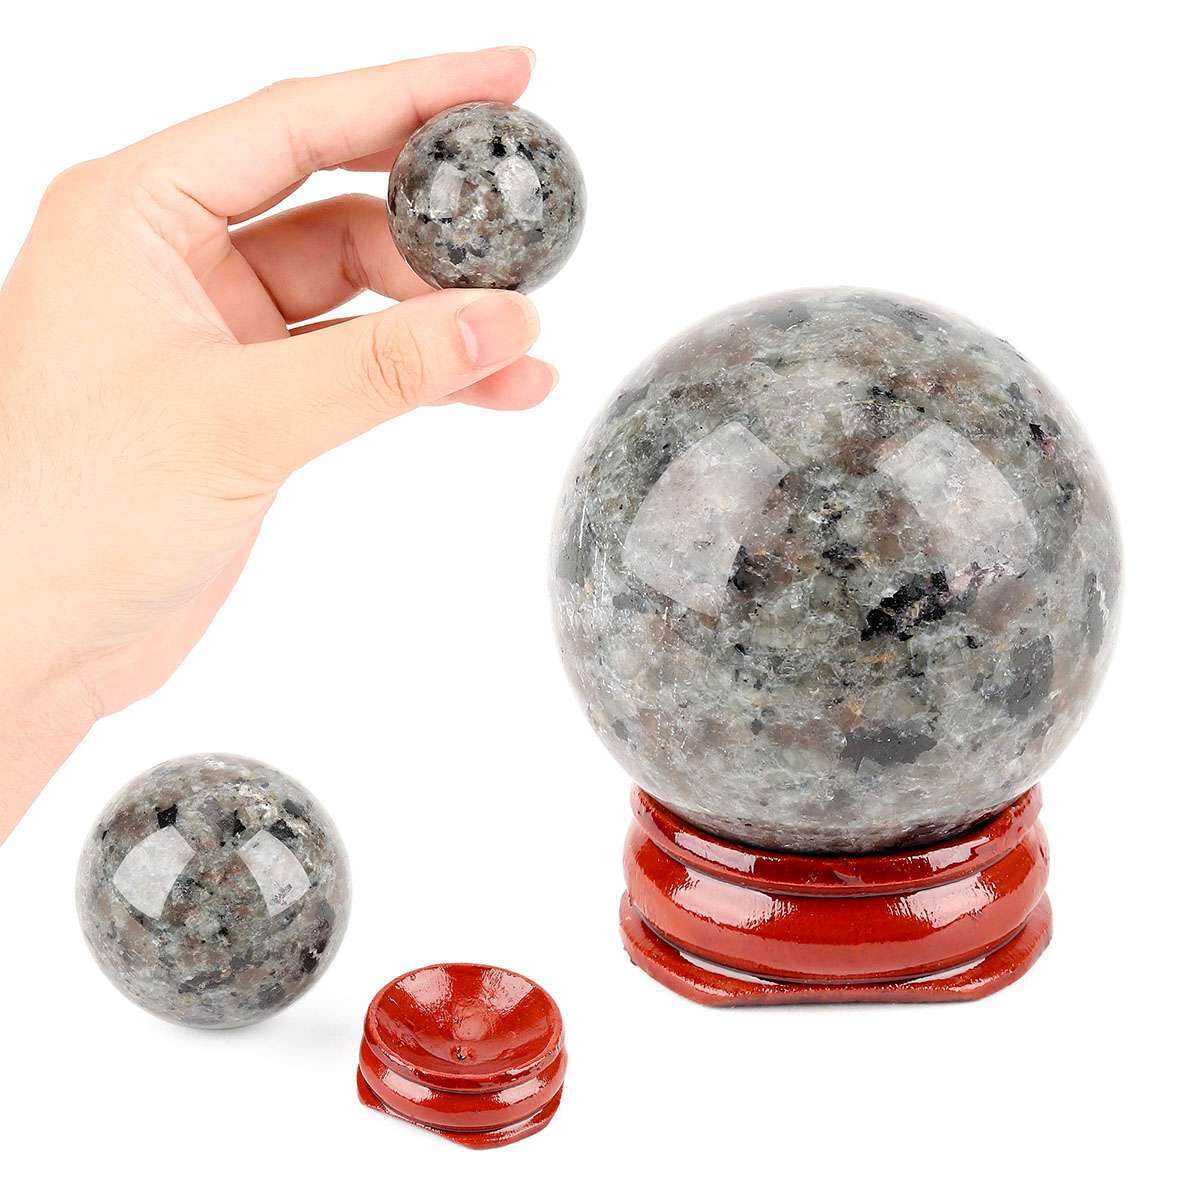 Crystal Ball Natural Stone Yooperlite Powerful Chakra Energy Wicca Crystals 40mm